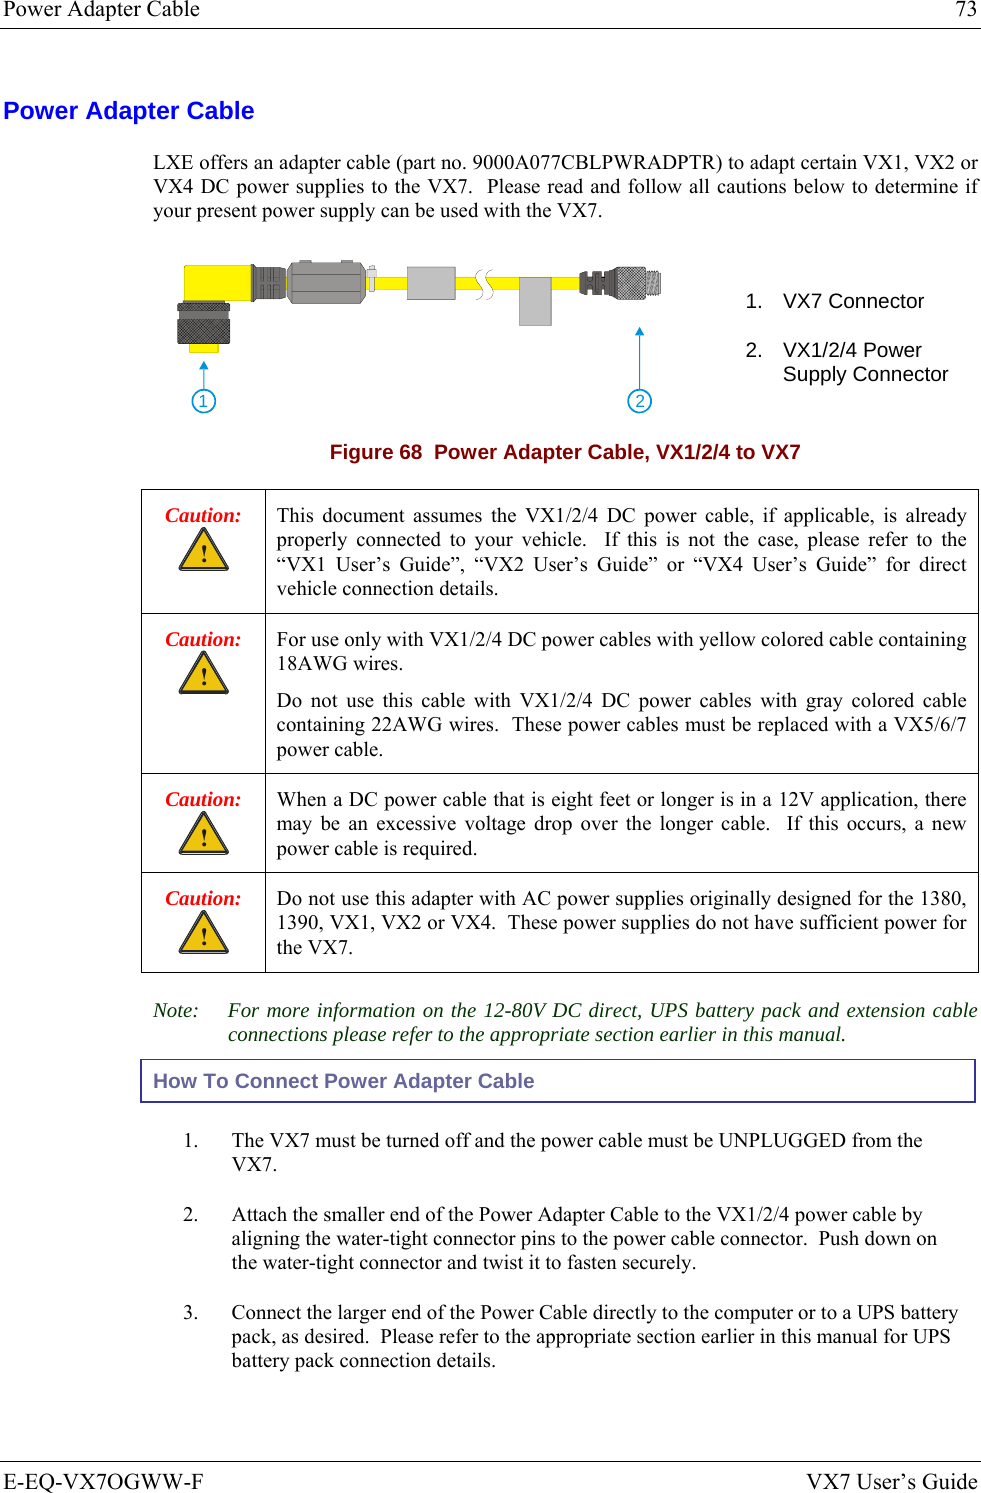 Power Adapter Cable  73 E-EQ-VX7OGWW-F  VX7 User’s Guide Power Adapter Cable LXE offers an adapter cable (part no. 9000A077CBLPWRADPTR) to adapt certain VX1, VX2 or VX4 DC power supplies to the VX7.  Please read and follow all cautions below to determine if your present power supply can be used with the VX7.    21 1. VX7 Connector 2. VX1/2/4 Power Supply Connector Figure 68  Power Adapter Cable, VX1/2/4 to VX7 Caution: ! This document assumes the VX1/2/4 DC power cable, if applicable, is already properly connected to your vehicle.  If this is not the case, please refer to the “VX1 User’s Guide”, “VX2 User’s Guide” or “VX4 User’s Guide” for direct vehicle connection details. Caution: ! For use only with VX1/2/4 DC power cables with yellow colored cable containing 18AWG wires. Do not use this cable with VX1/2/4 DC power cables with gray colored cable containing 22AWG wires.  These power cables must be replaced with a VX5/6/7 power cable. Caution: ! When a DC power cable that is eight feet or longer is in a 12V application, there may be an excessive voltage drop over the longer cable.  If this occurs, a new power cable is required. Caution: ! Do not use this adapter with AC power supplies originally designed for the 1380, 1390, VX1, VX2 or VX4.  These power supplies do not have sufficient power for the VX7. Note:  For more information on the 12-80V DC direct, UPS battery pack and extension cable connections please refer to the appropriate section earlier in this manual. How To Connect Power Adapter Cable 1.  The VX7 must be turned off and the power cable must be UNPLUGGED from the VX7. 2.  Attach the smaller end of the Power Adapter Cable to the VX1/2/4 power cable by aligning the water-tight connector pins to the power cable connector.  Push down on the water-tight connector and twist it to fasten securely. 3.  Connect the larger end of the Power Cable directly to the computer or to a UPS battery pack, as desired.  Please refer to the appropriate section earlier in this manual for UPS battery pack connection details. 